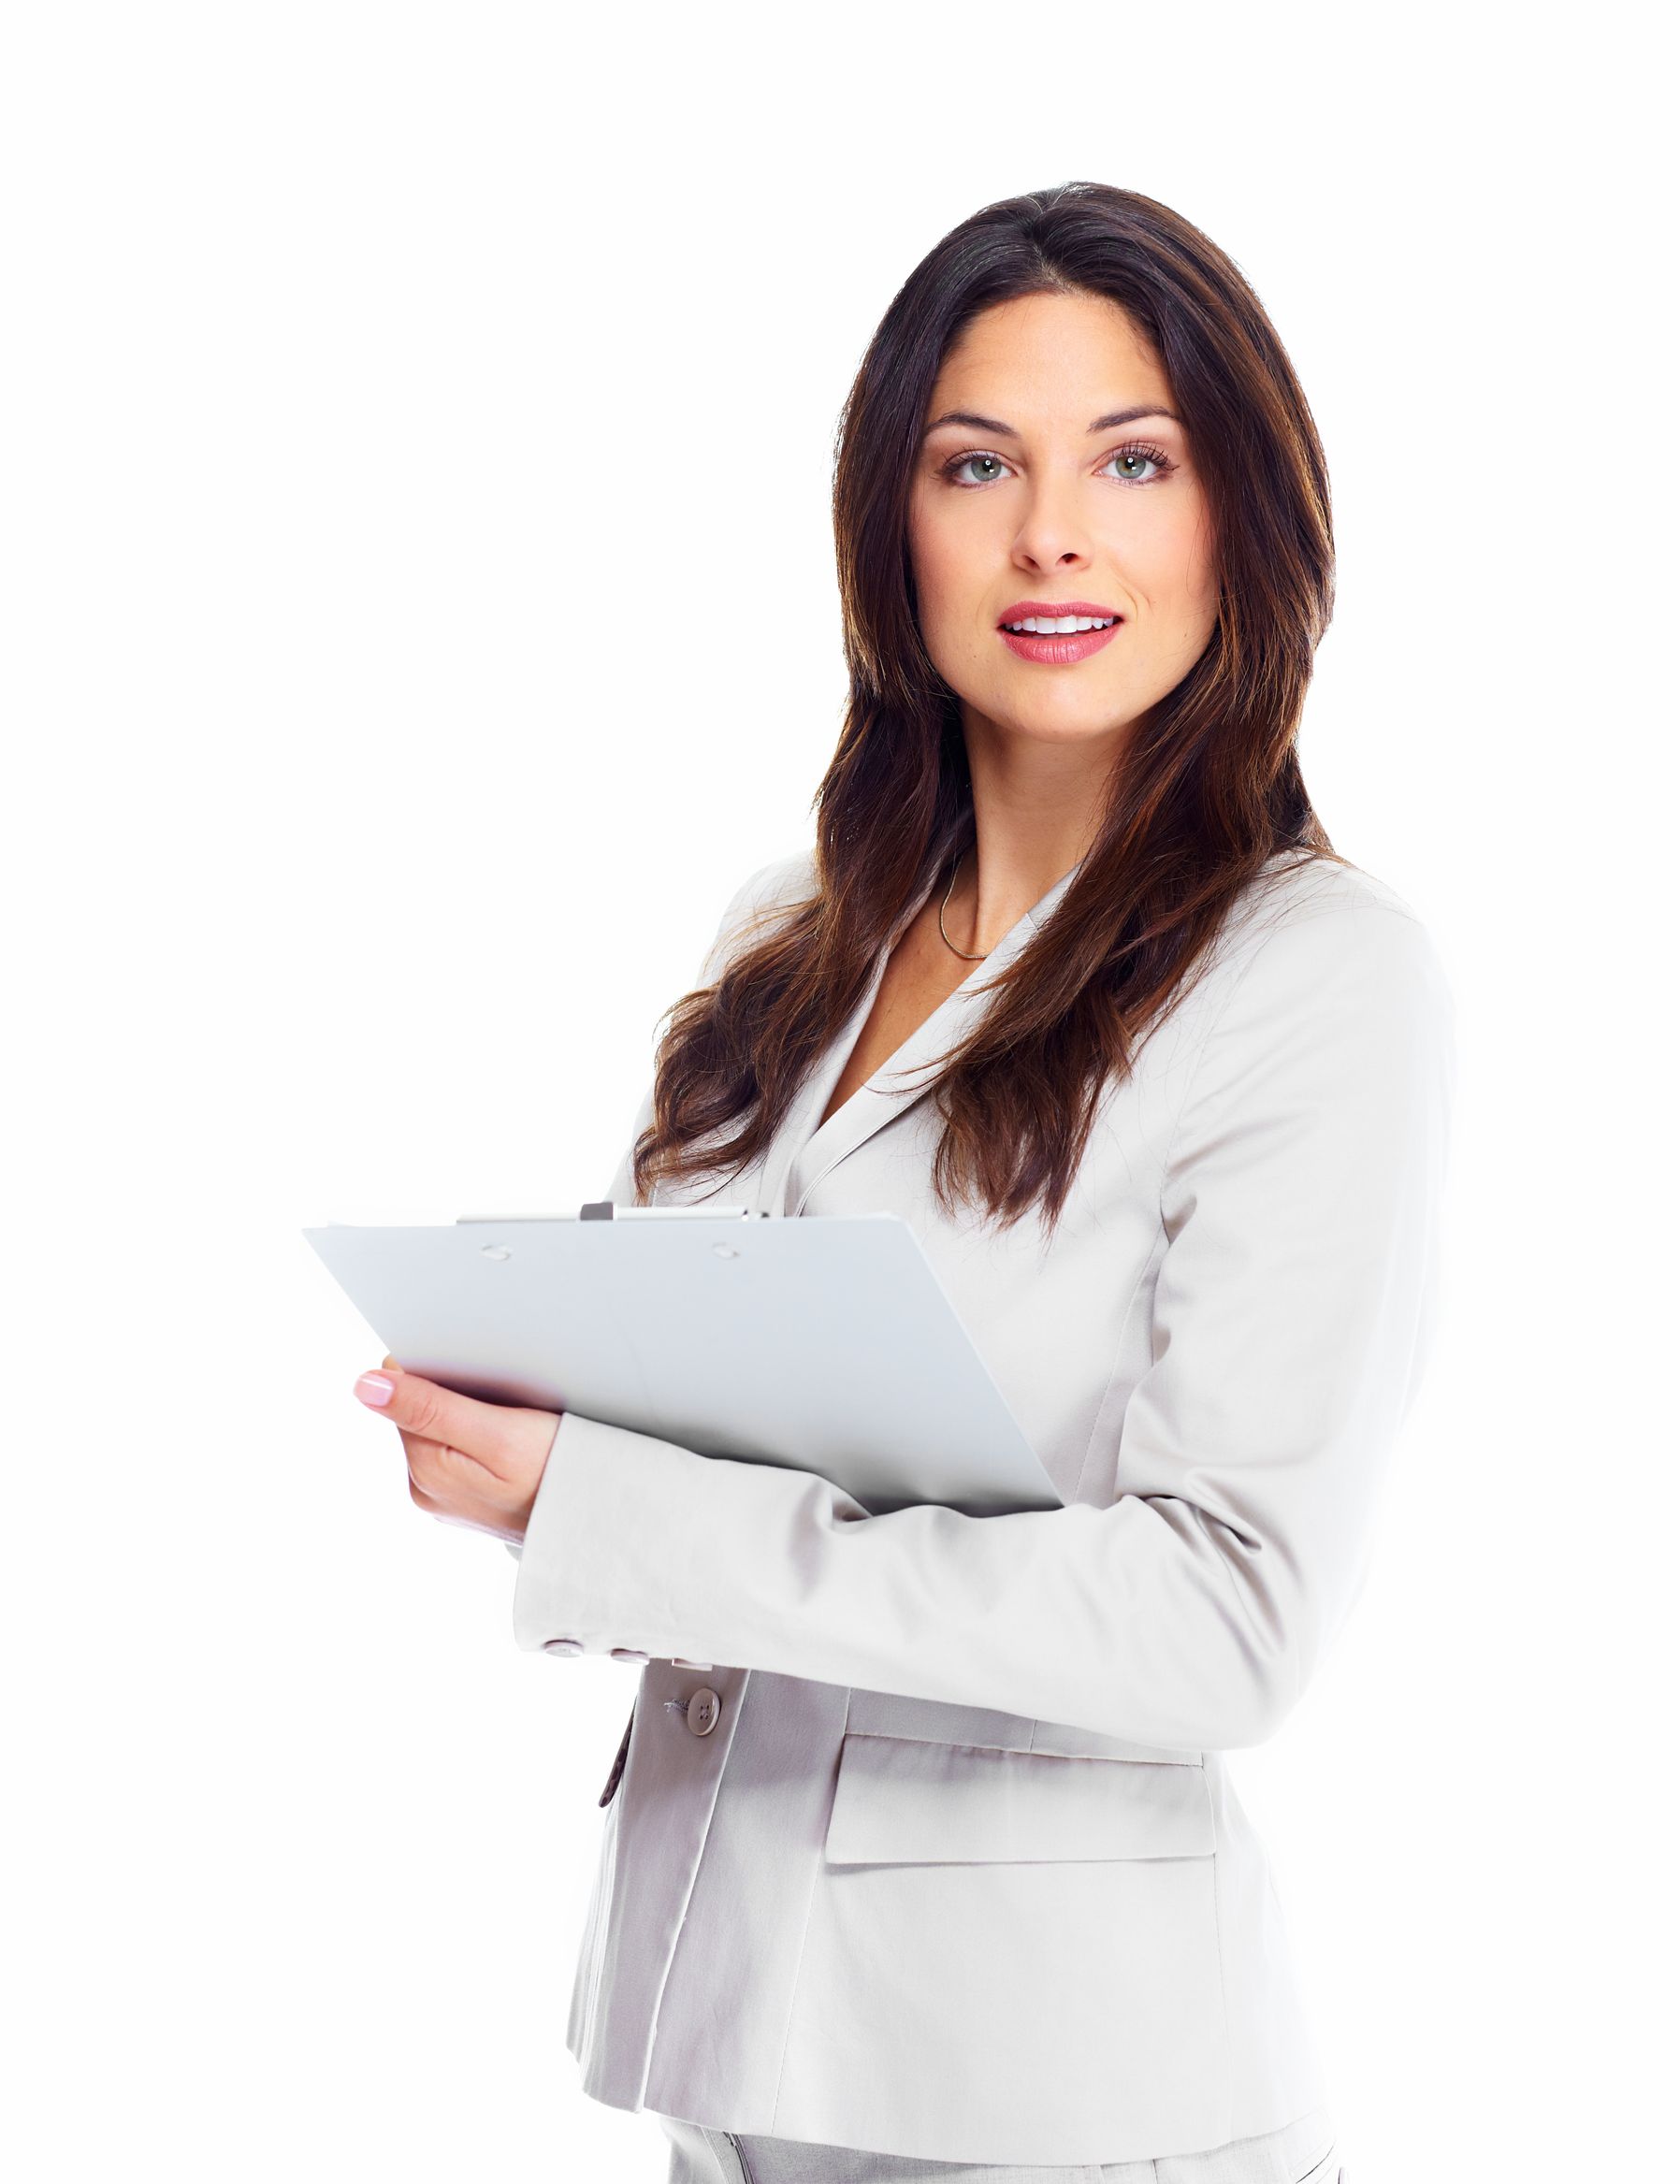 Business Woman Wallpapers High Quality Download Free